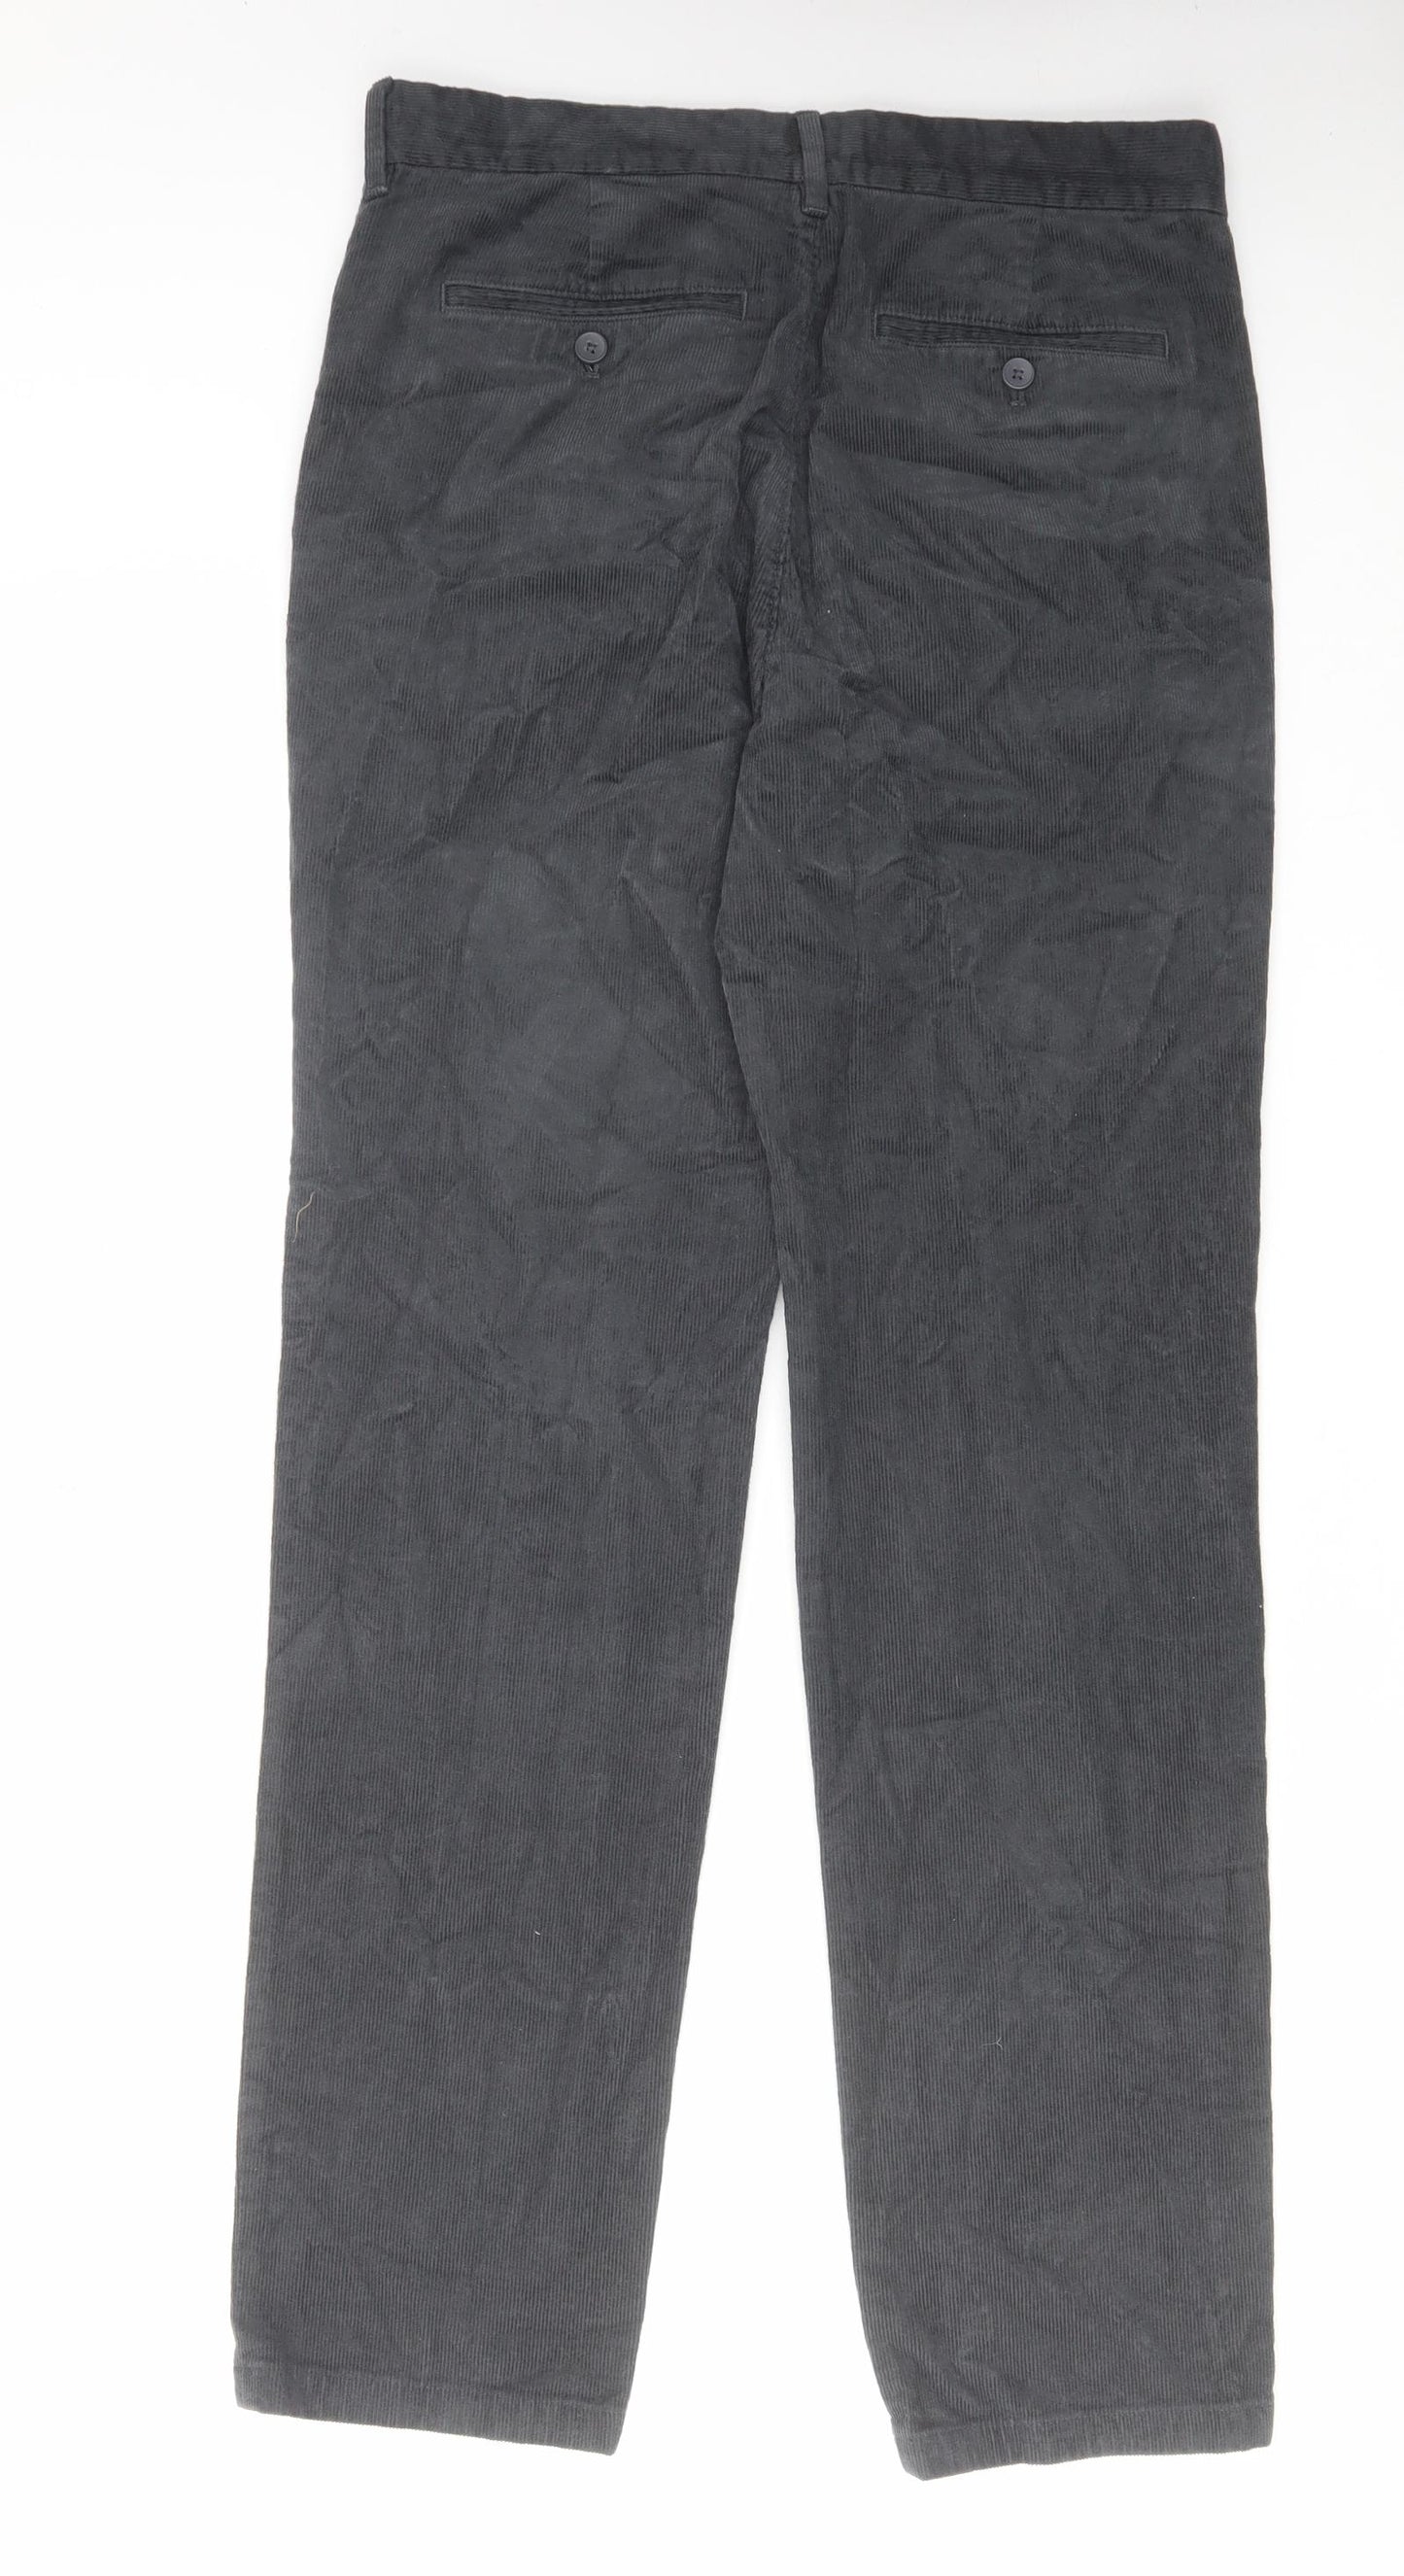 Marks and Spencer Mens Grey Cotton Chino Trousers Size 30 in L33 in Regular Zip